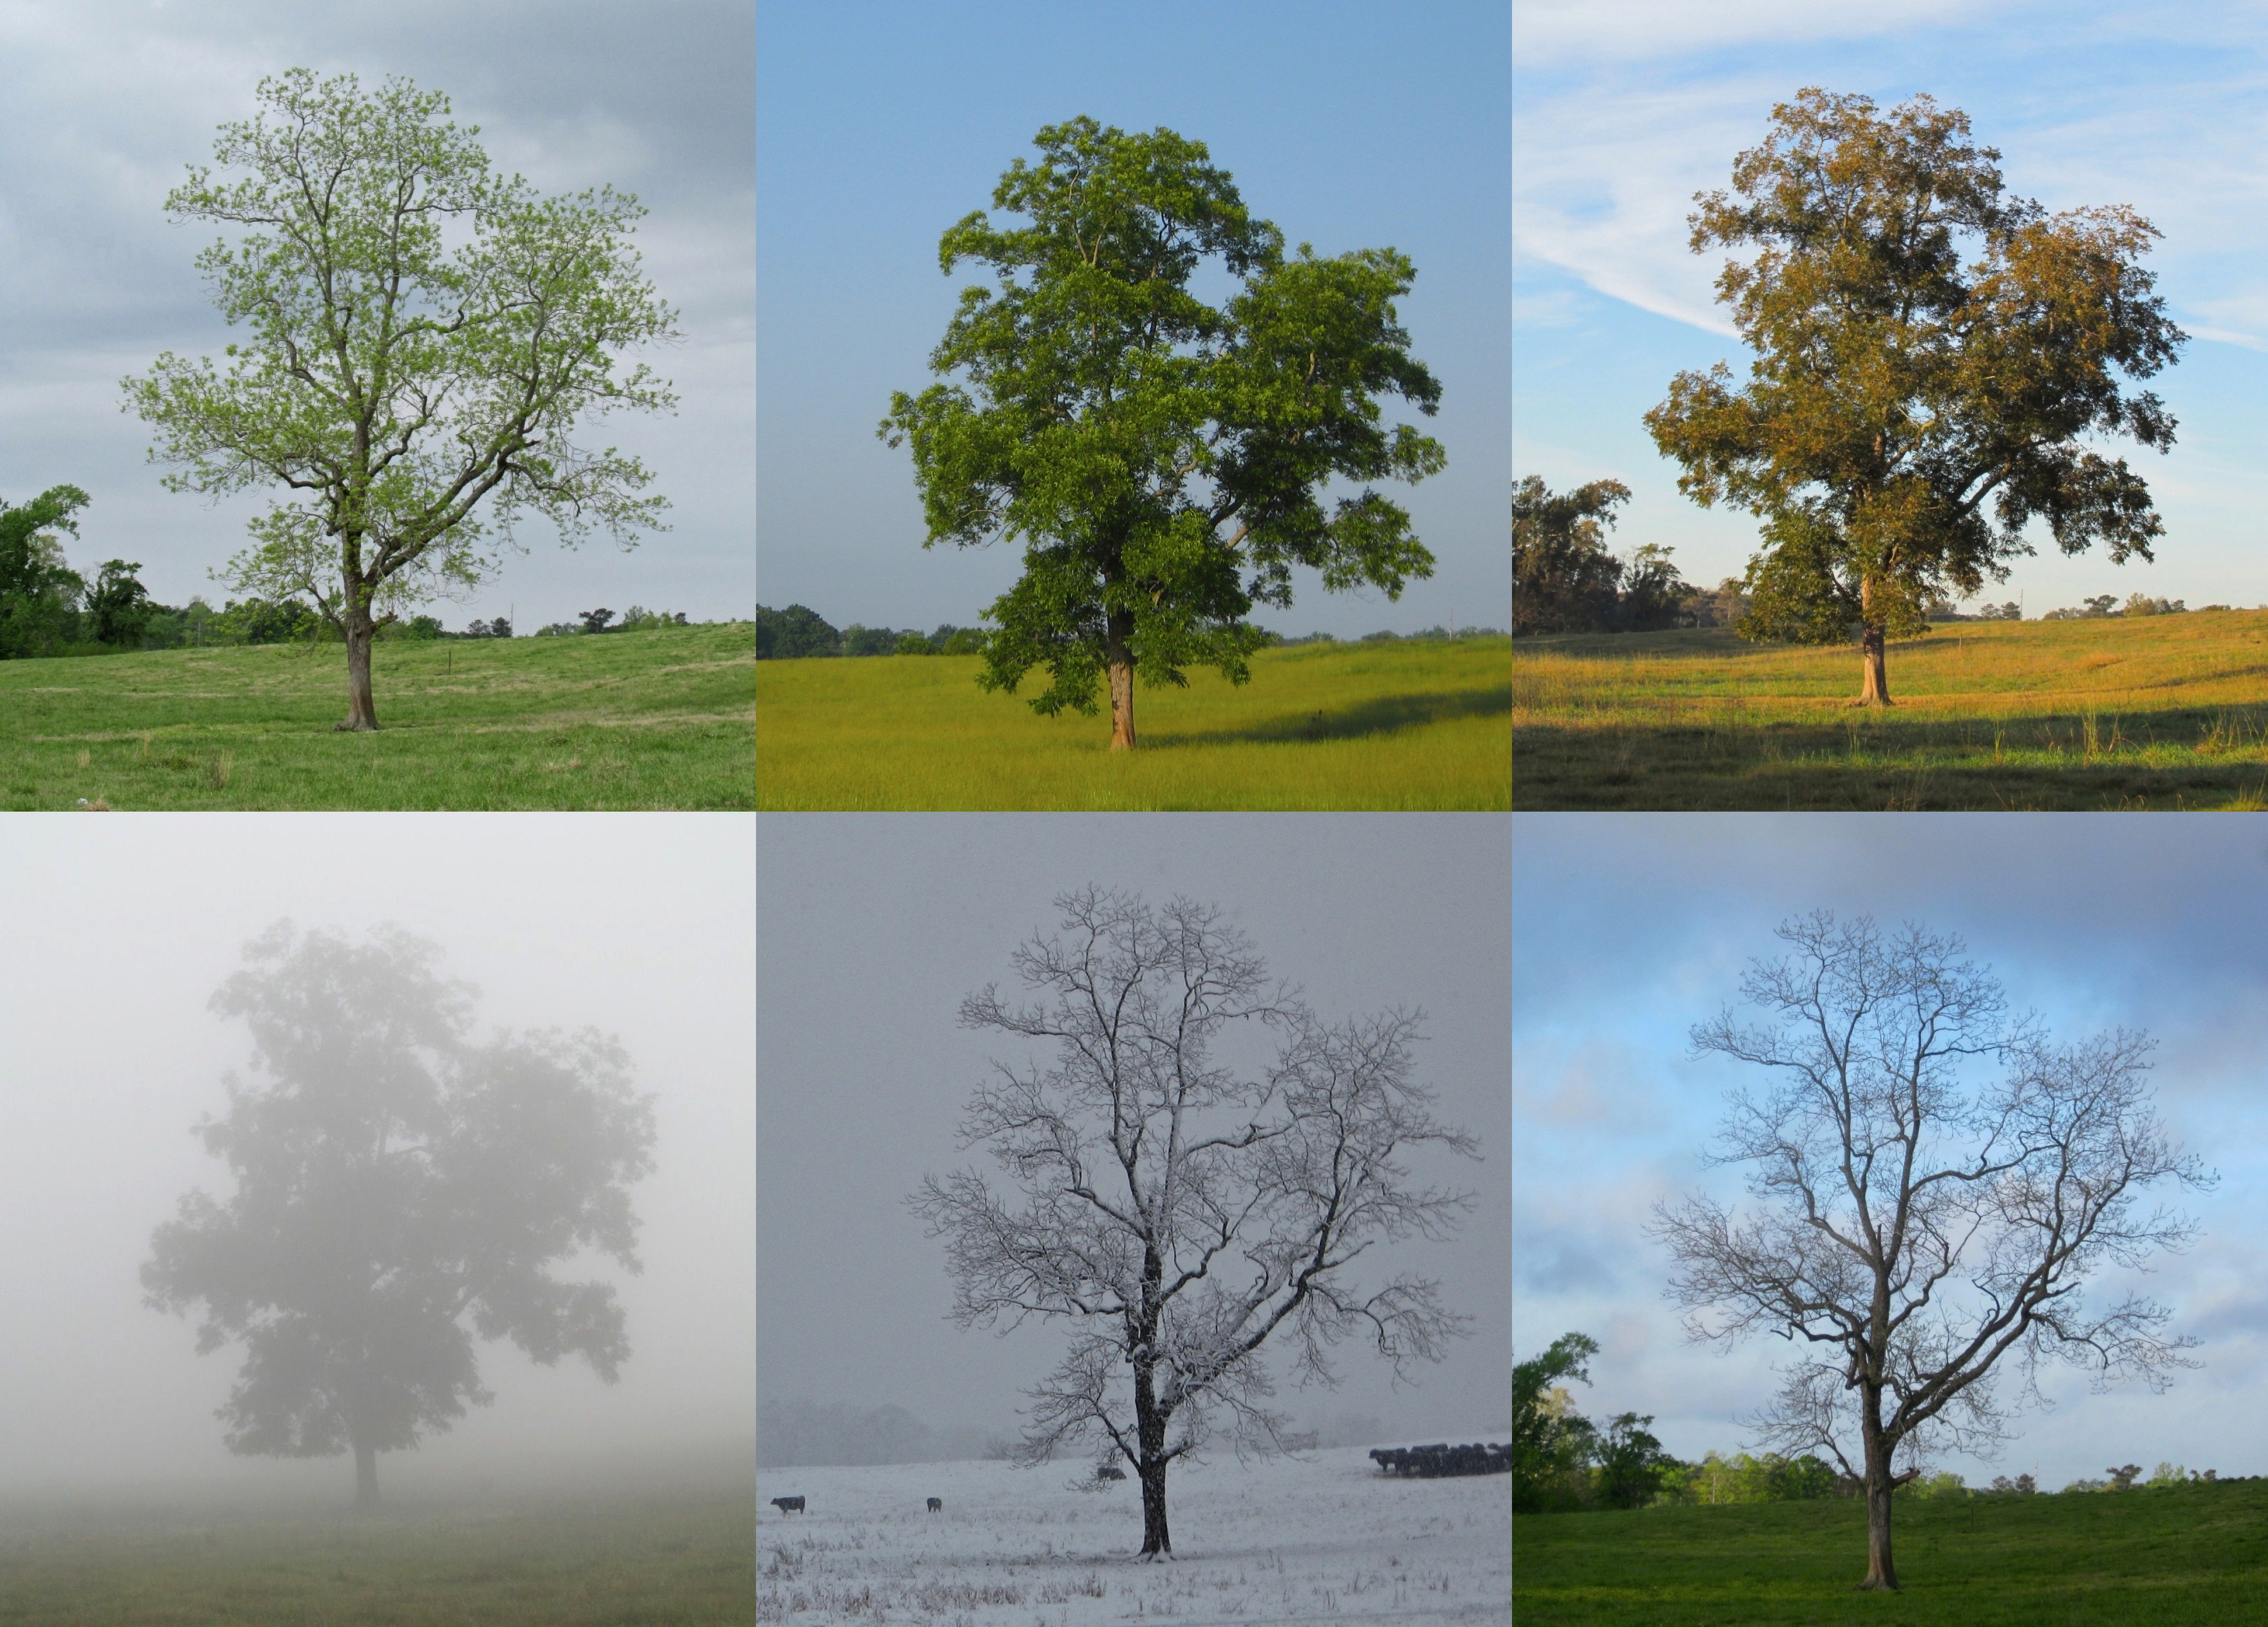 Seasons of a Lone Tree by Vicky van Santen, first place. 